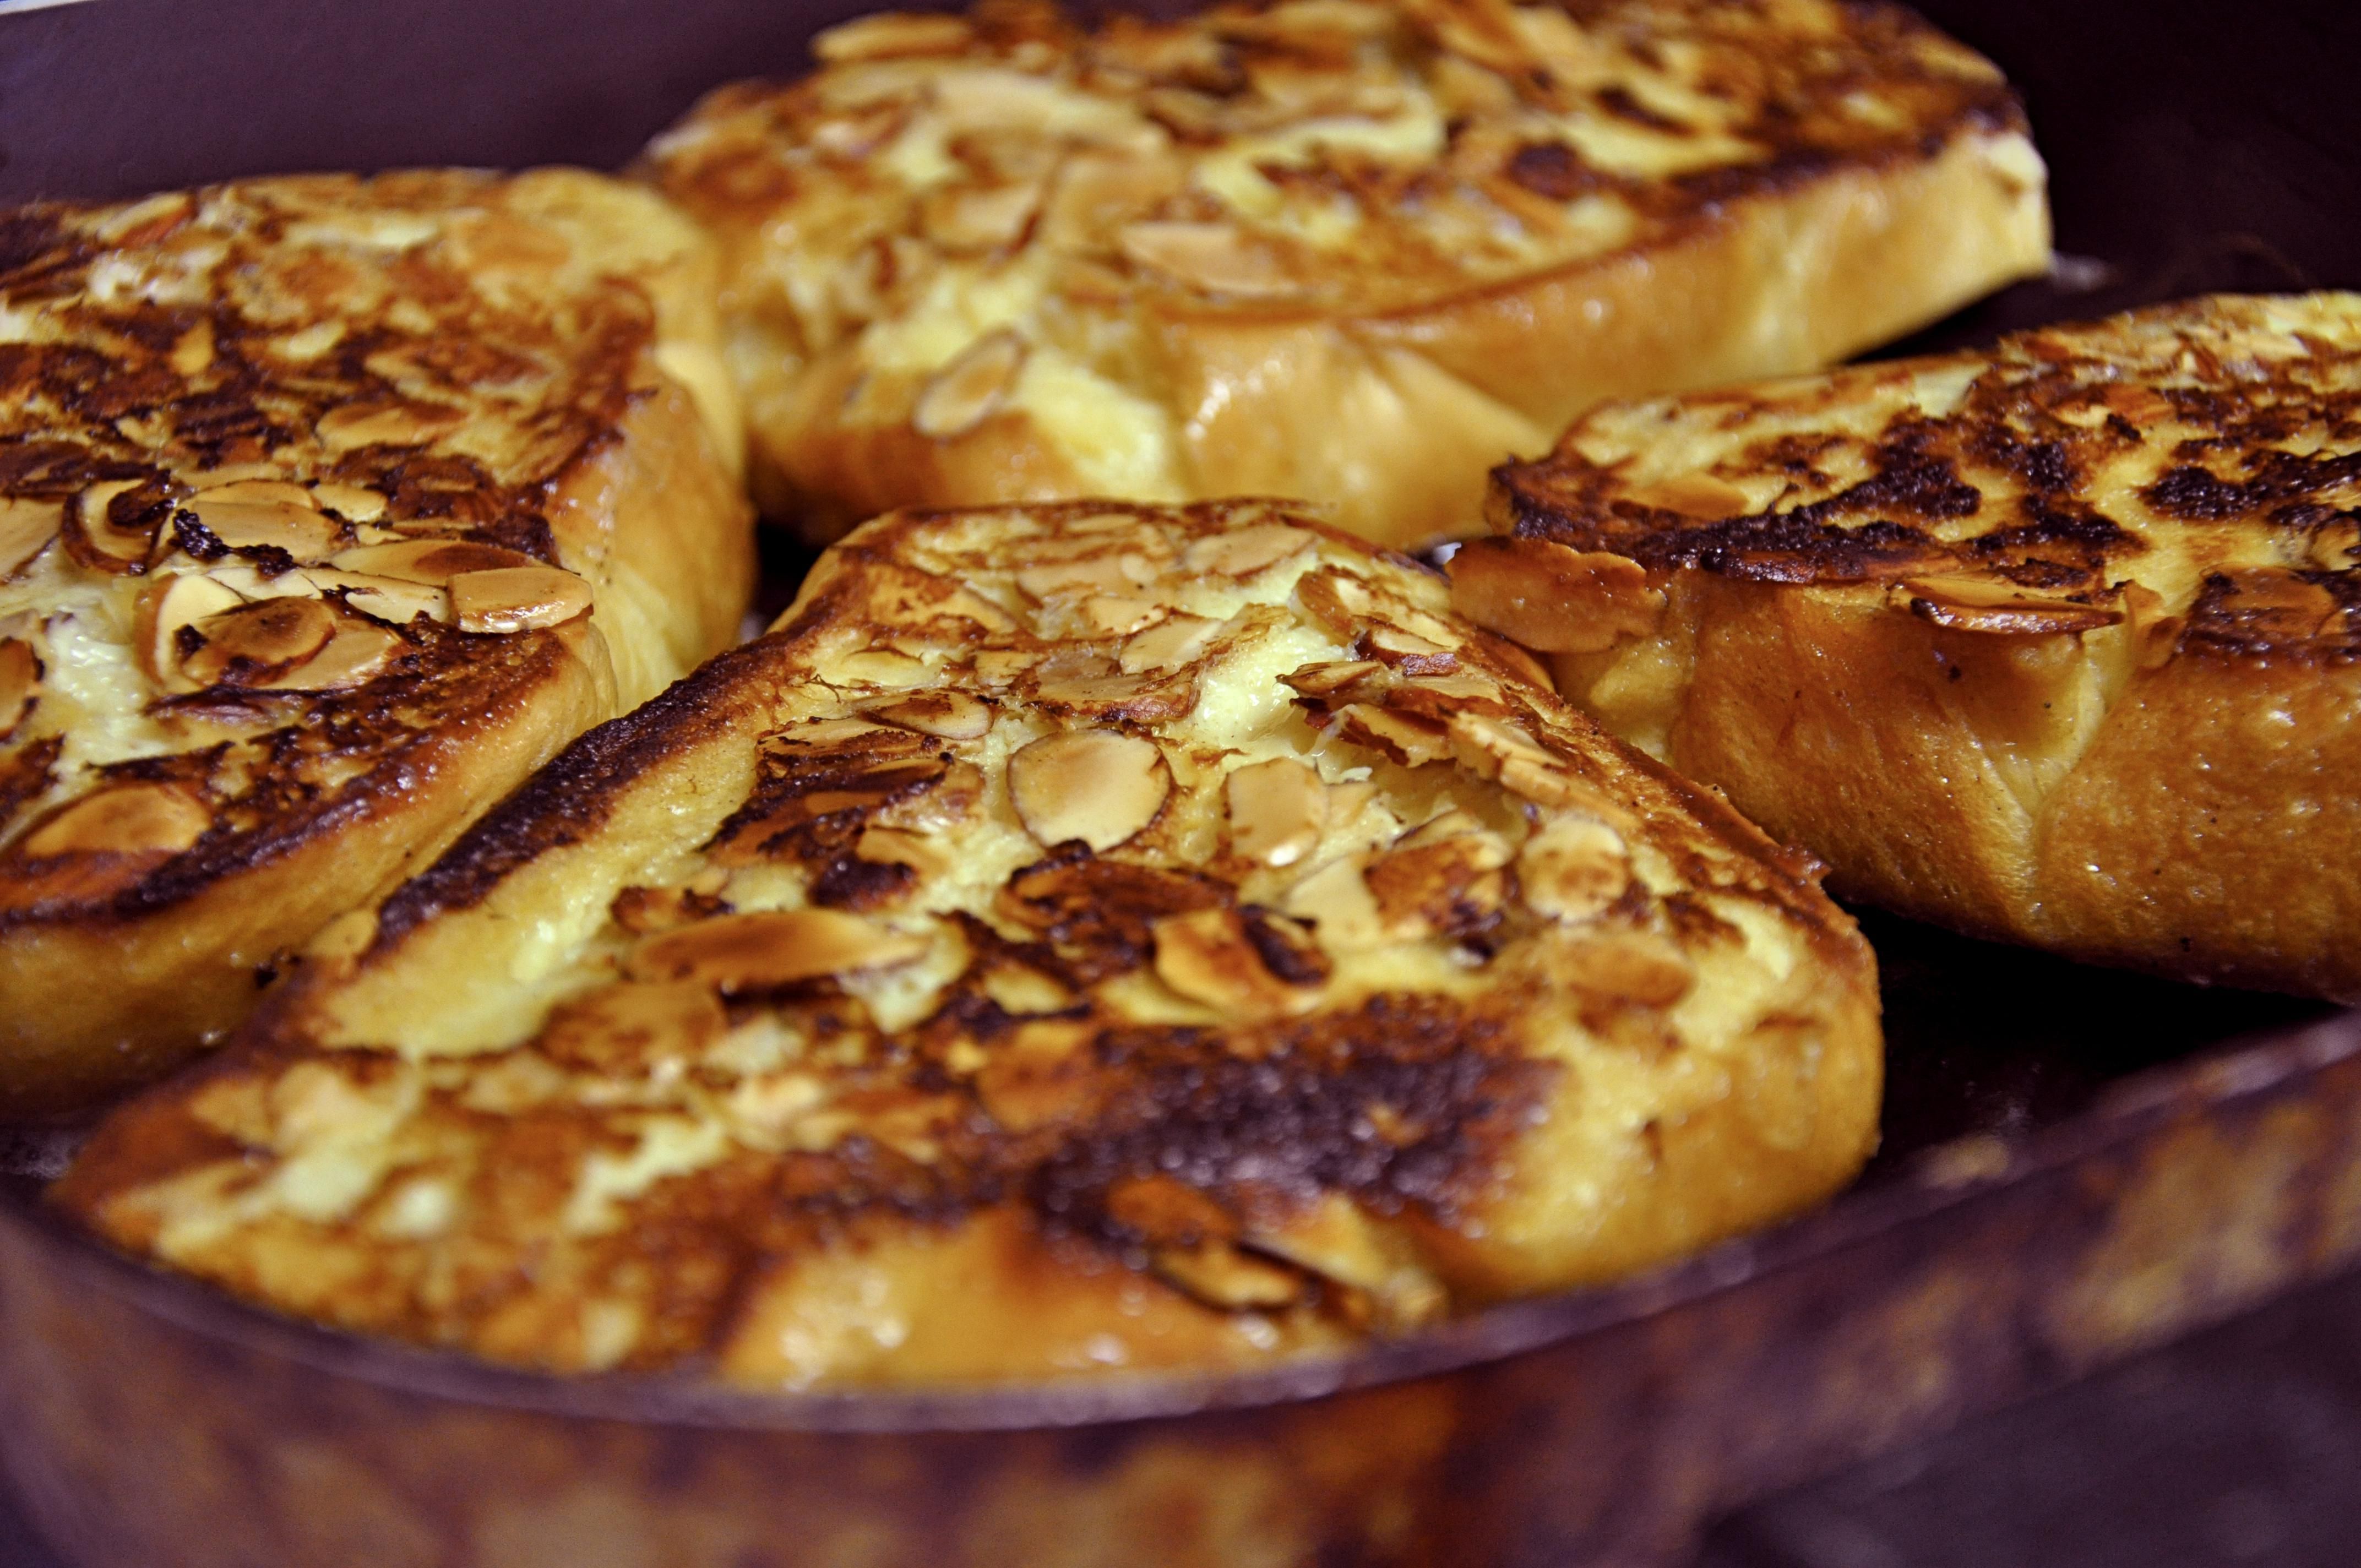 New Orleans-Style French Toast "Pain Perdu" Recipe